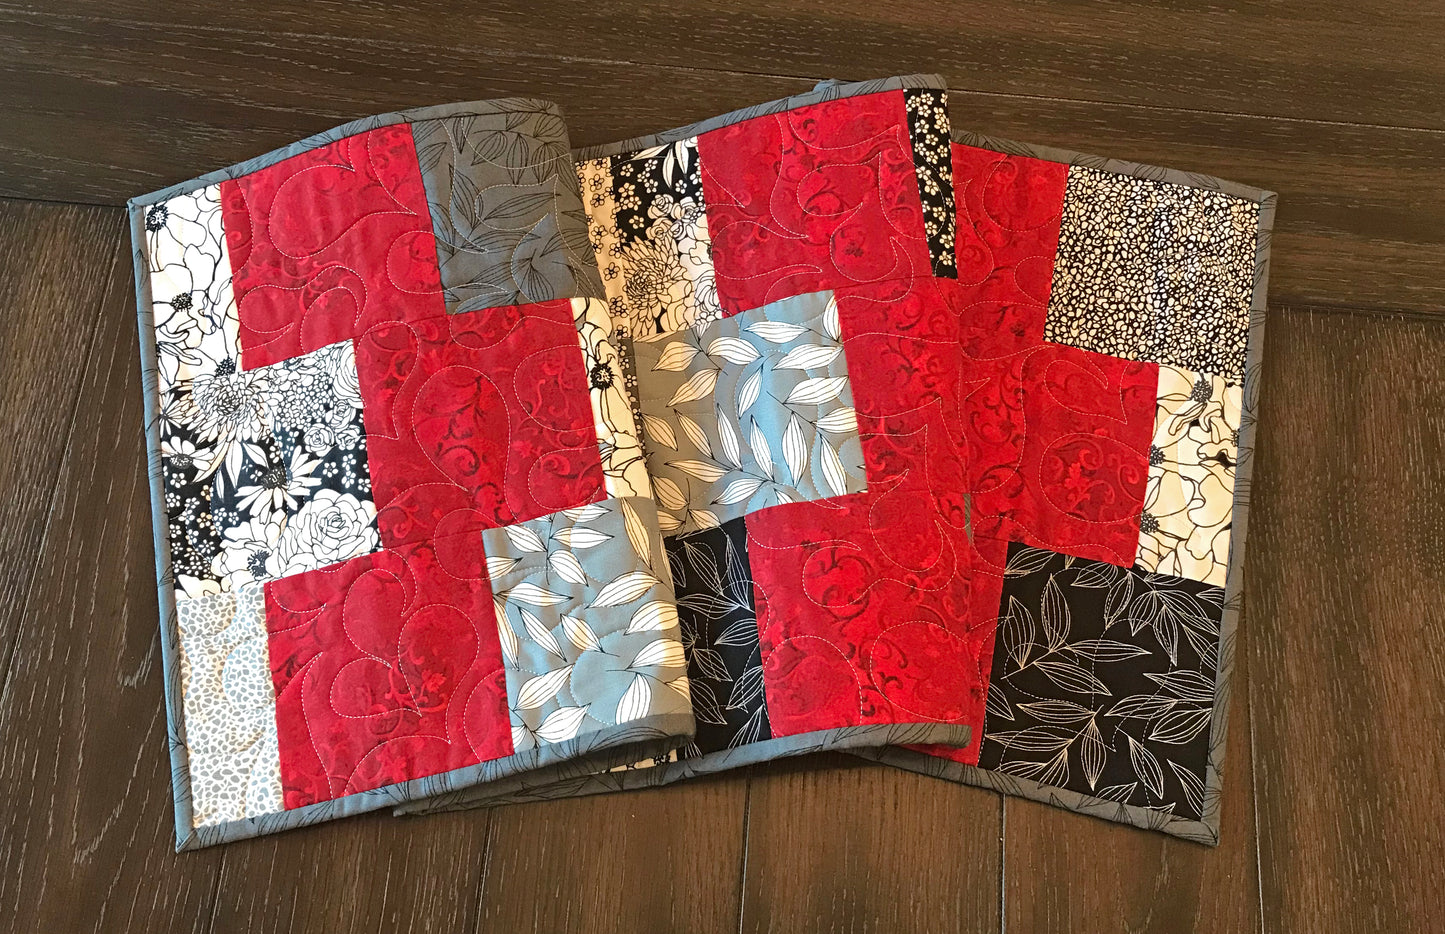 Gray and Red Patchwork Table Runner - Handmade Quilts, Digital Patterns, and Home Décor items online - Cuddle Cat Quiltworks